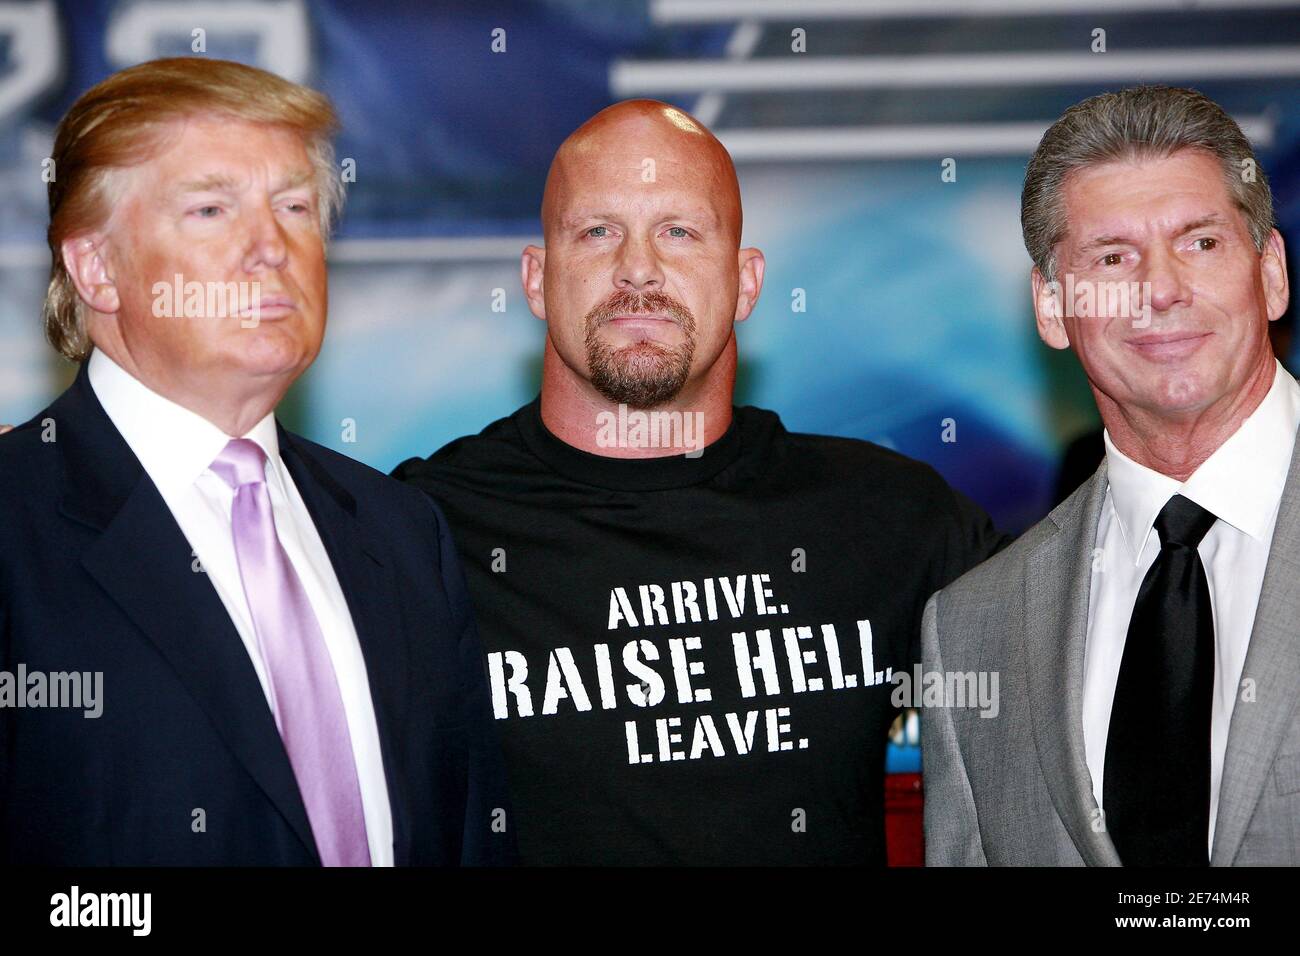 Donald Trump, wrestler Stone Cold Steve Austin and WWE Chairman Vince McMahon attend the press conference held by Battle of the Billionaires to announce the details of Wrestlemania 23 at Trump Tower on March 28, 2007 in New York City. If Donald Trump's designated wrestler Bobby Lasley wins, Trump will shave off Vince MacMahon's hair. If McMahon's wrestler wins, Trump will have his hair shaved off live by McMahon. Photo by Gerald Holubowicz/ABACAPRESS.COM Stock Photo